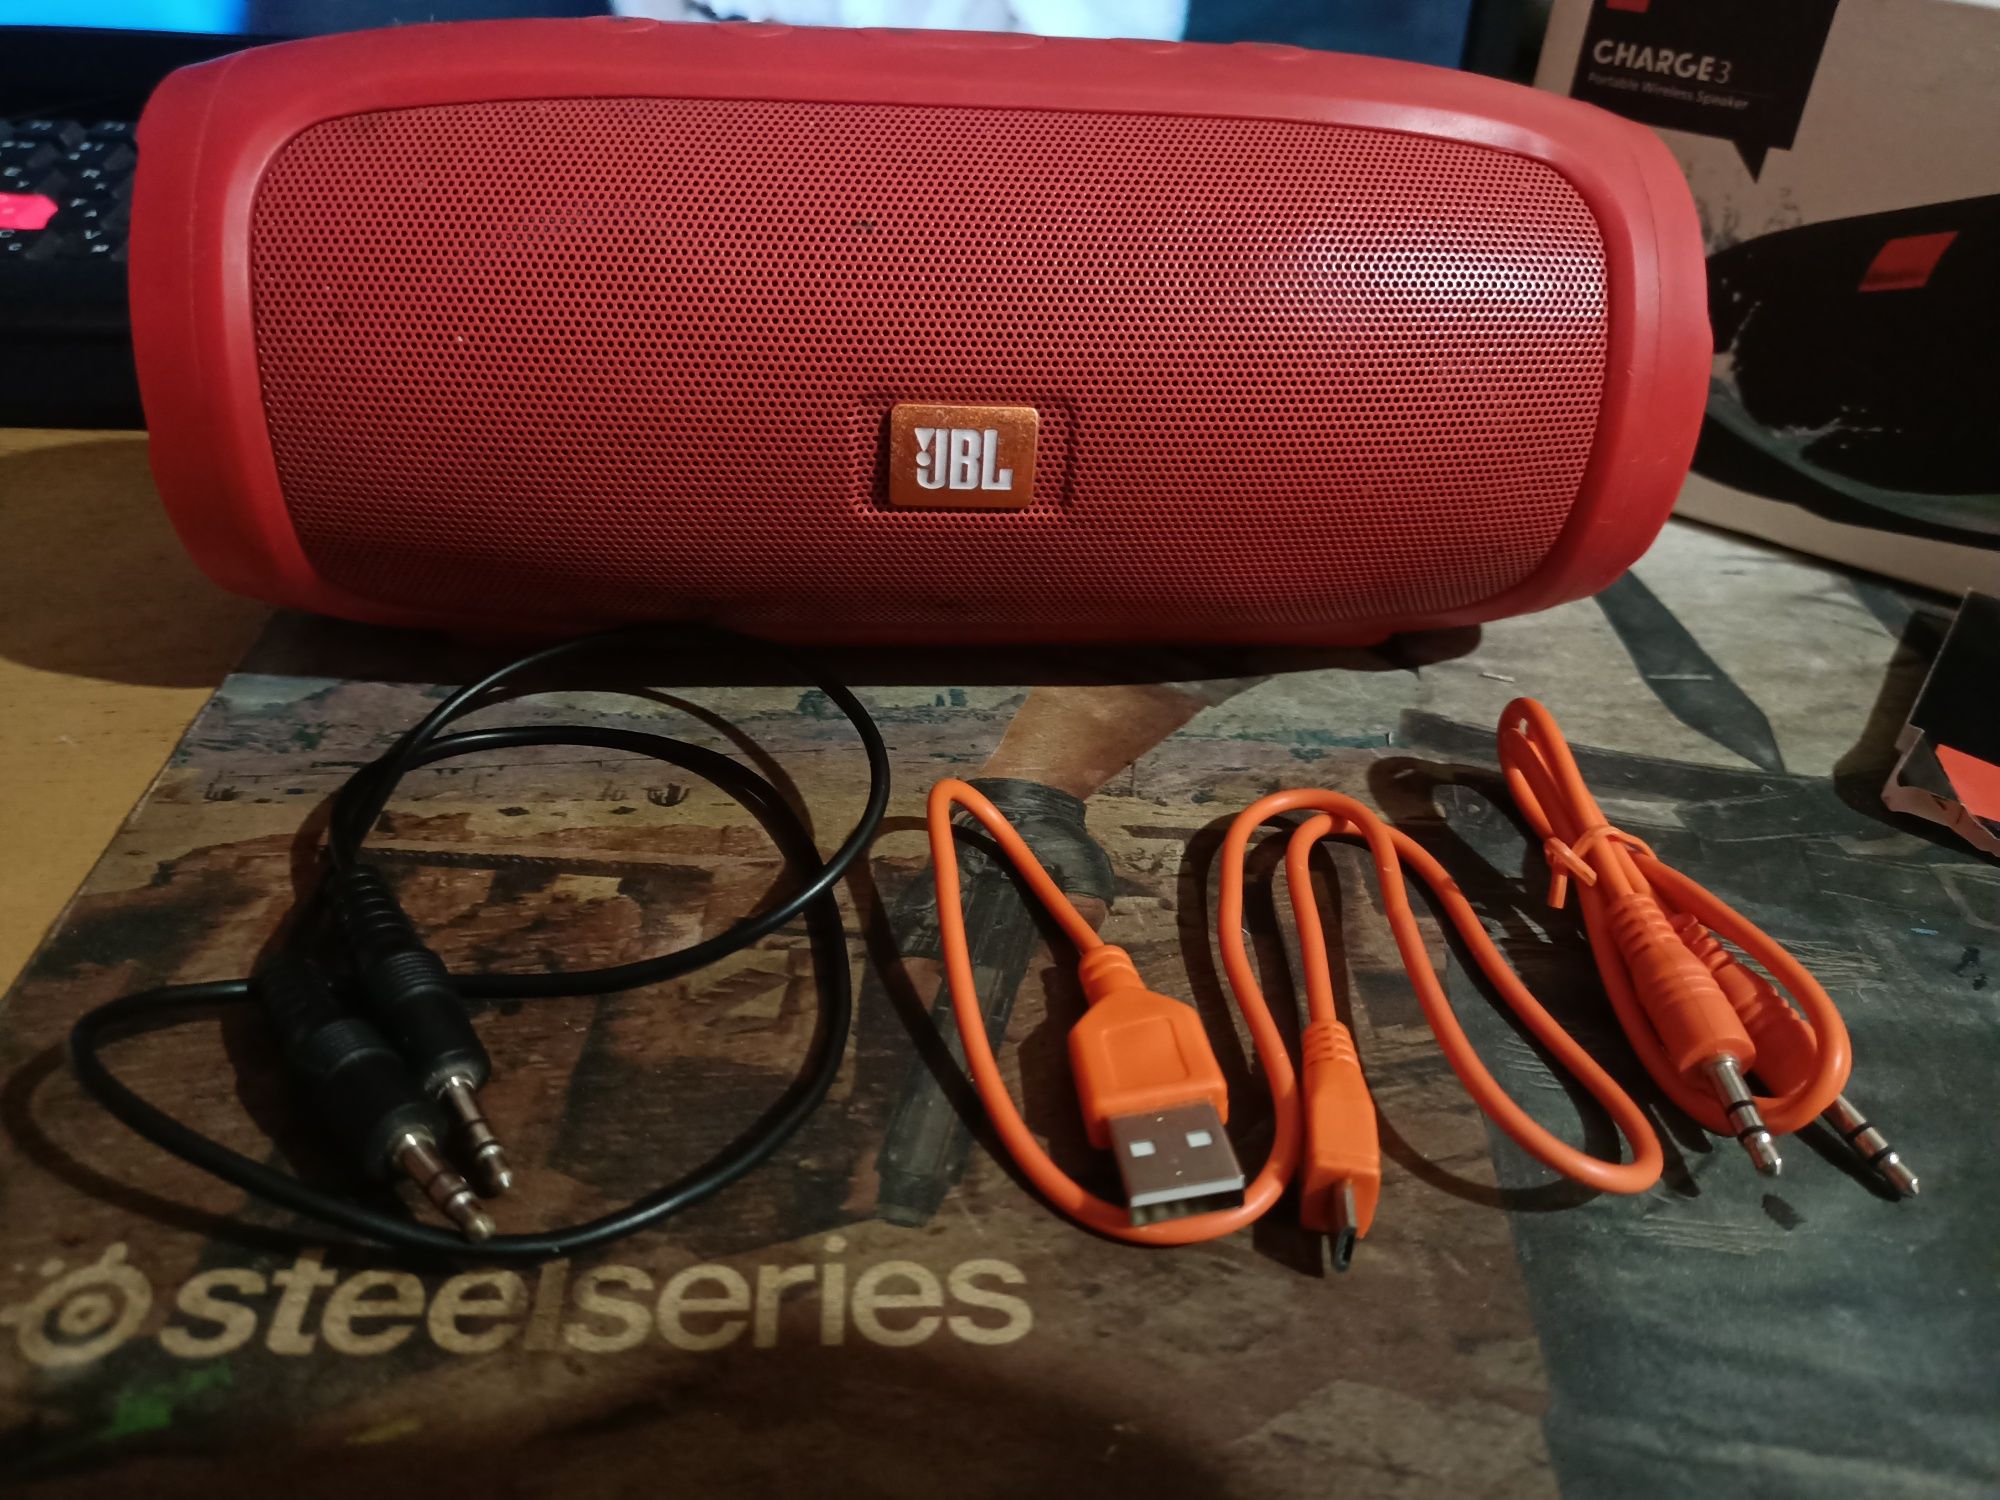 Charge 3 portable wireless speaker